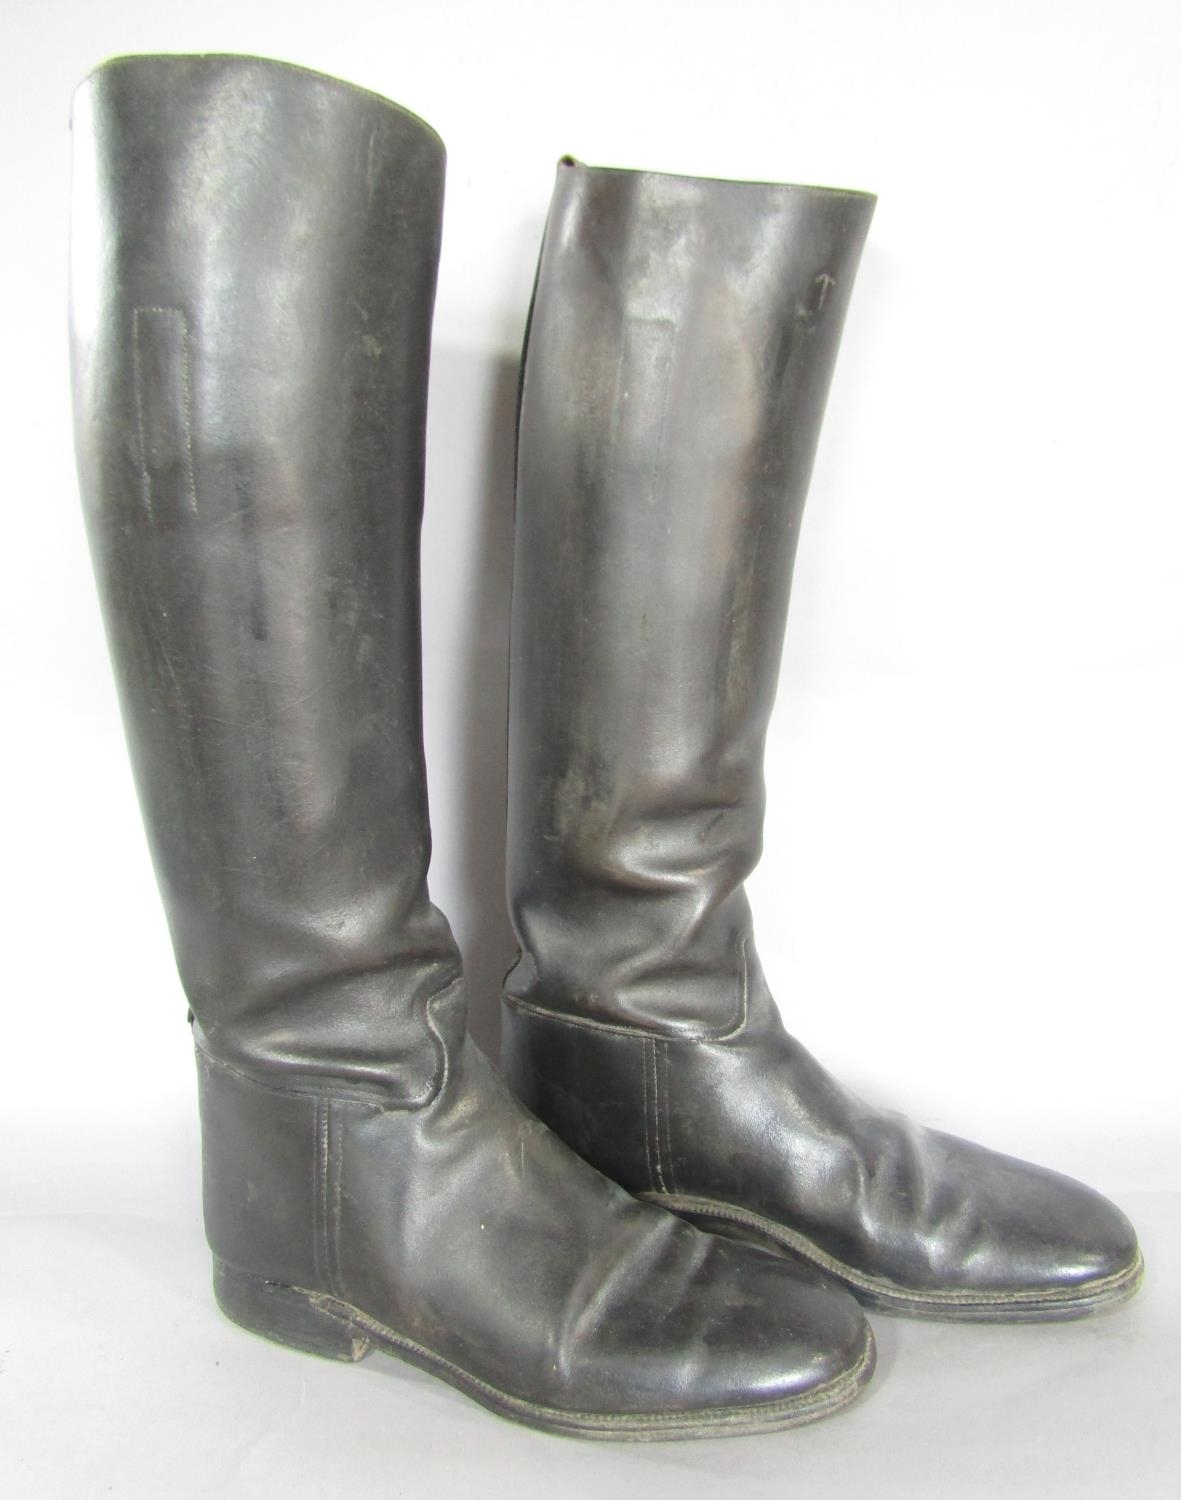 A pair of vintage black leather riding boots, Made by Maxwell, Dover St, Piccadilly.